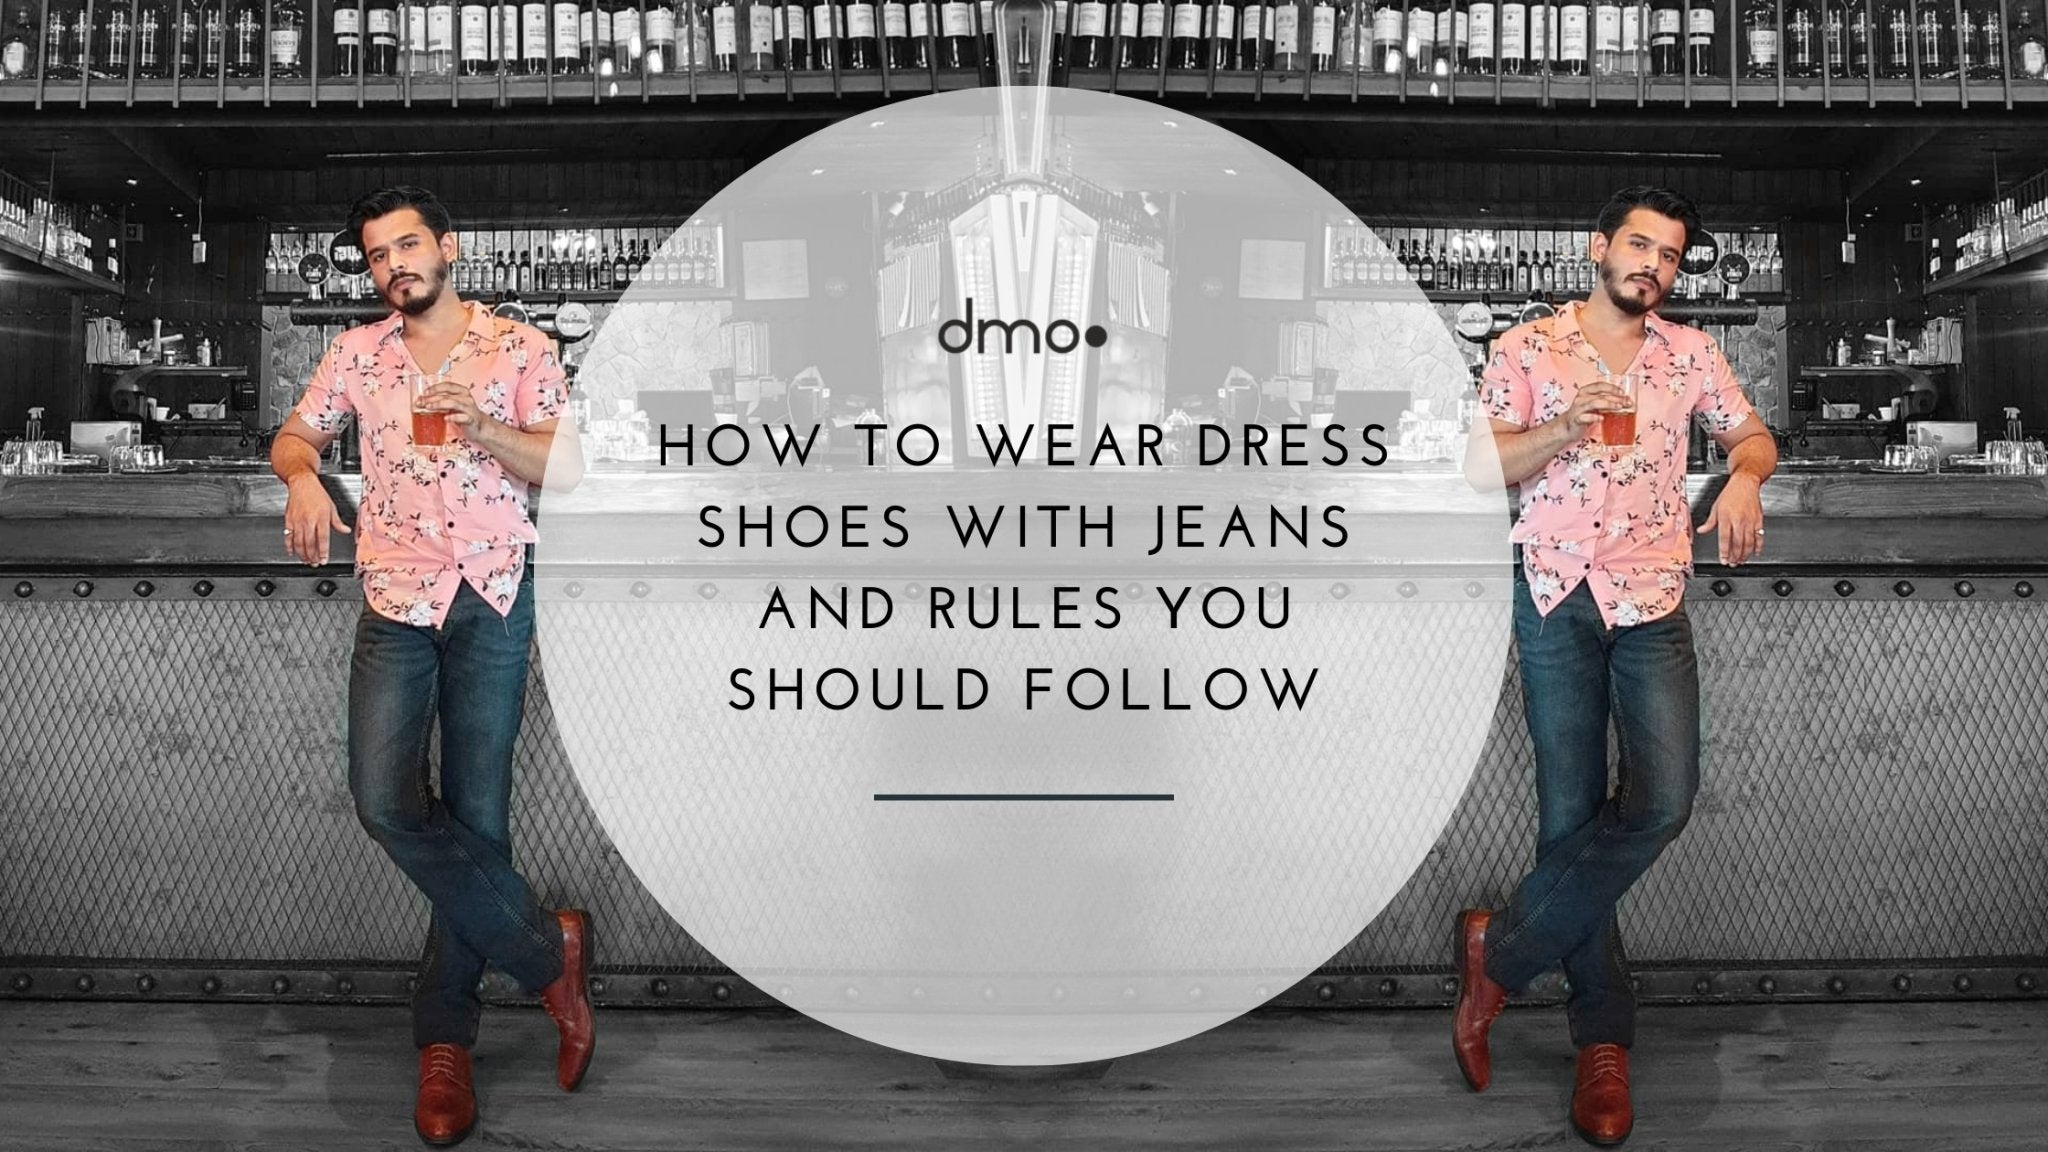 How to wear dress shoes with jeans